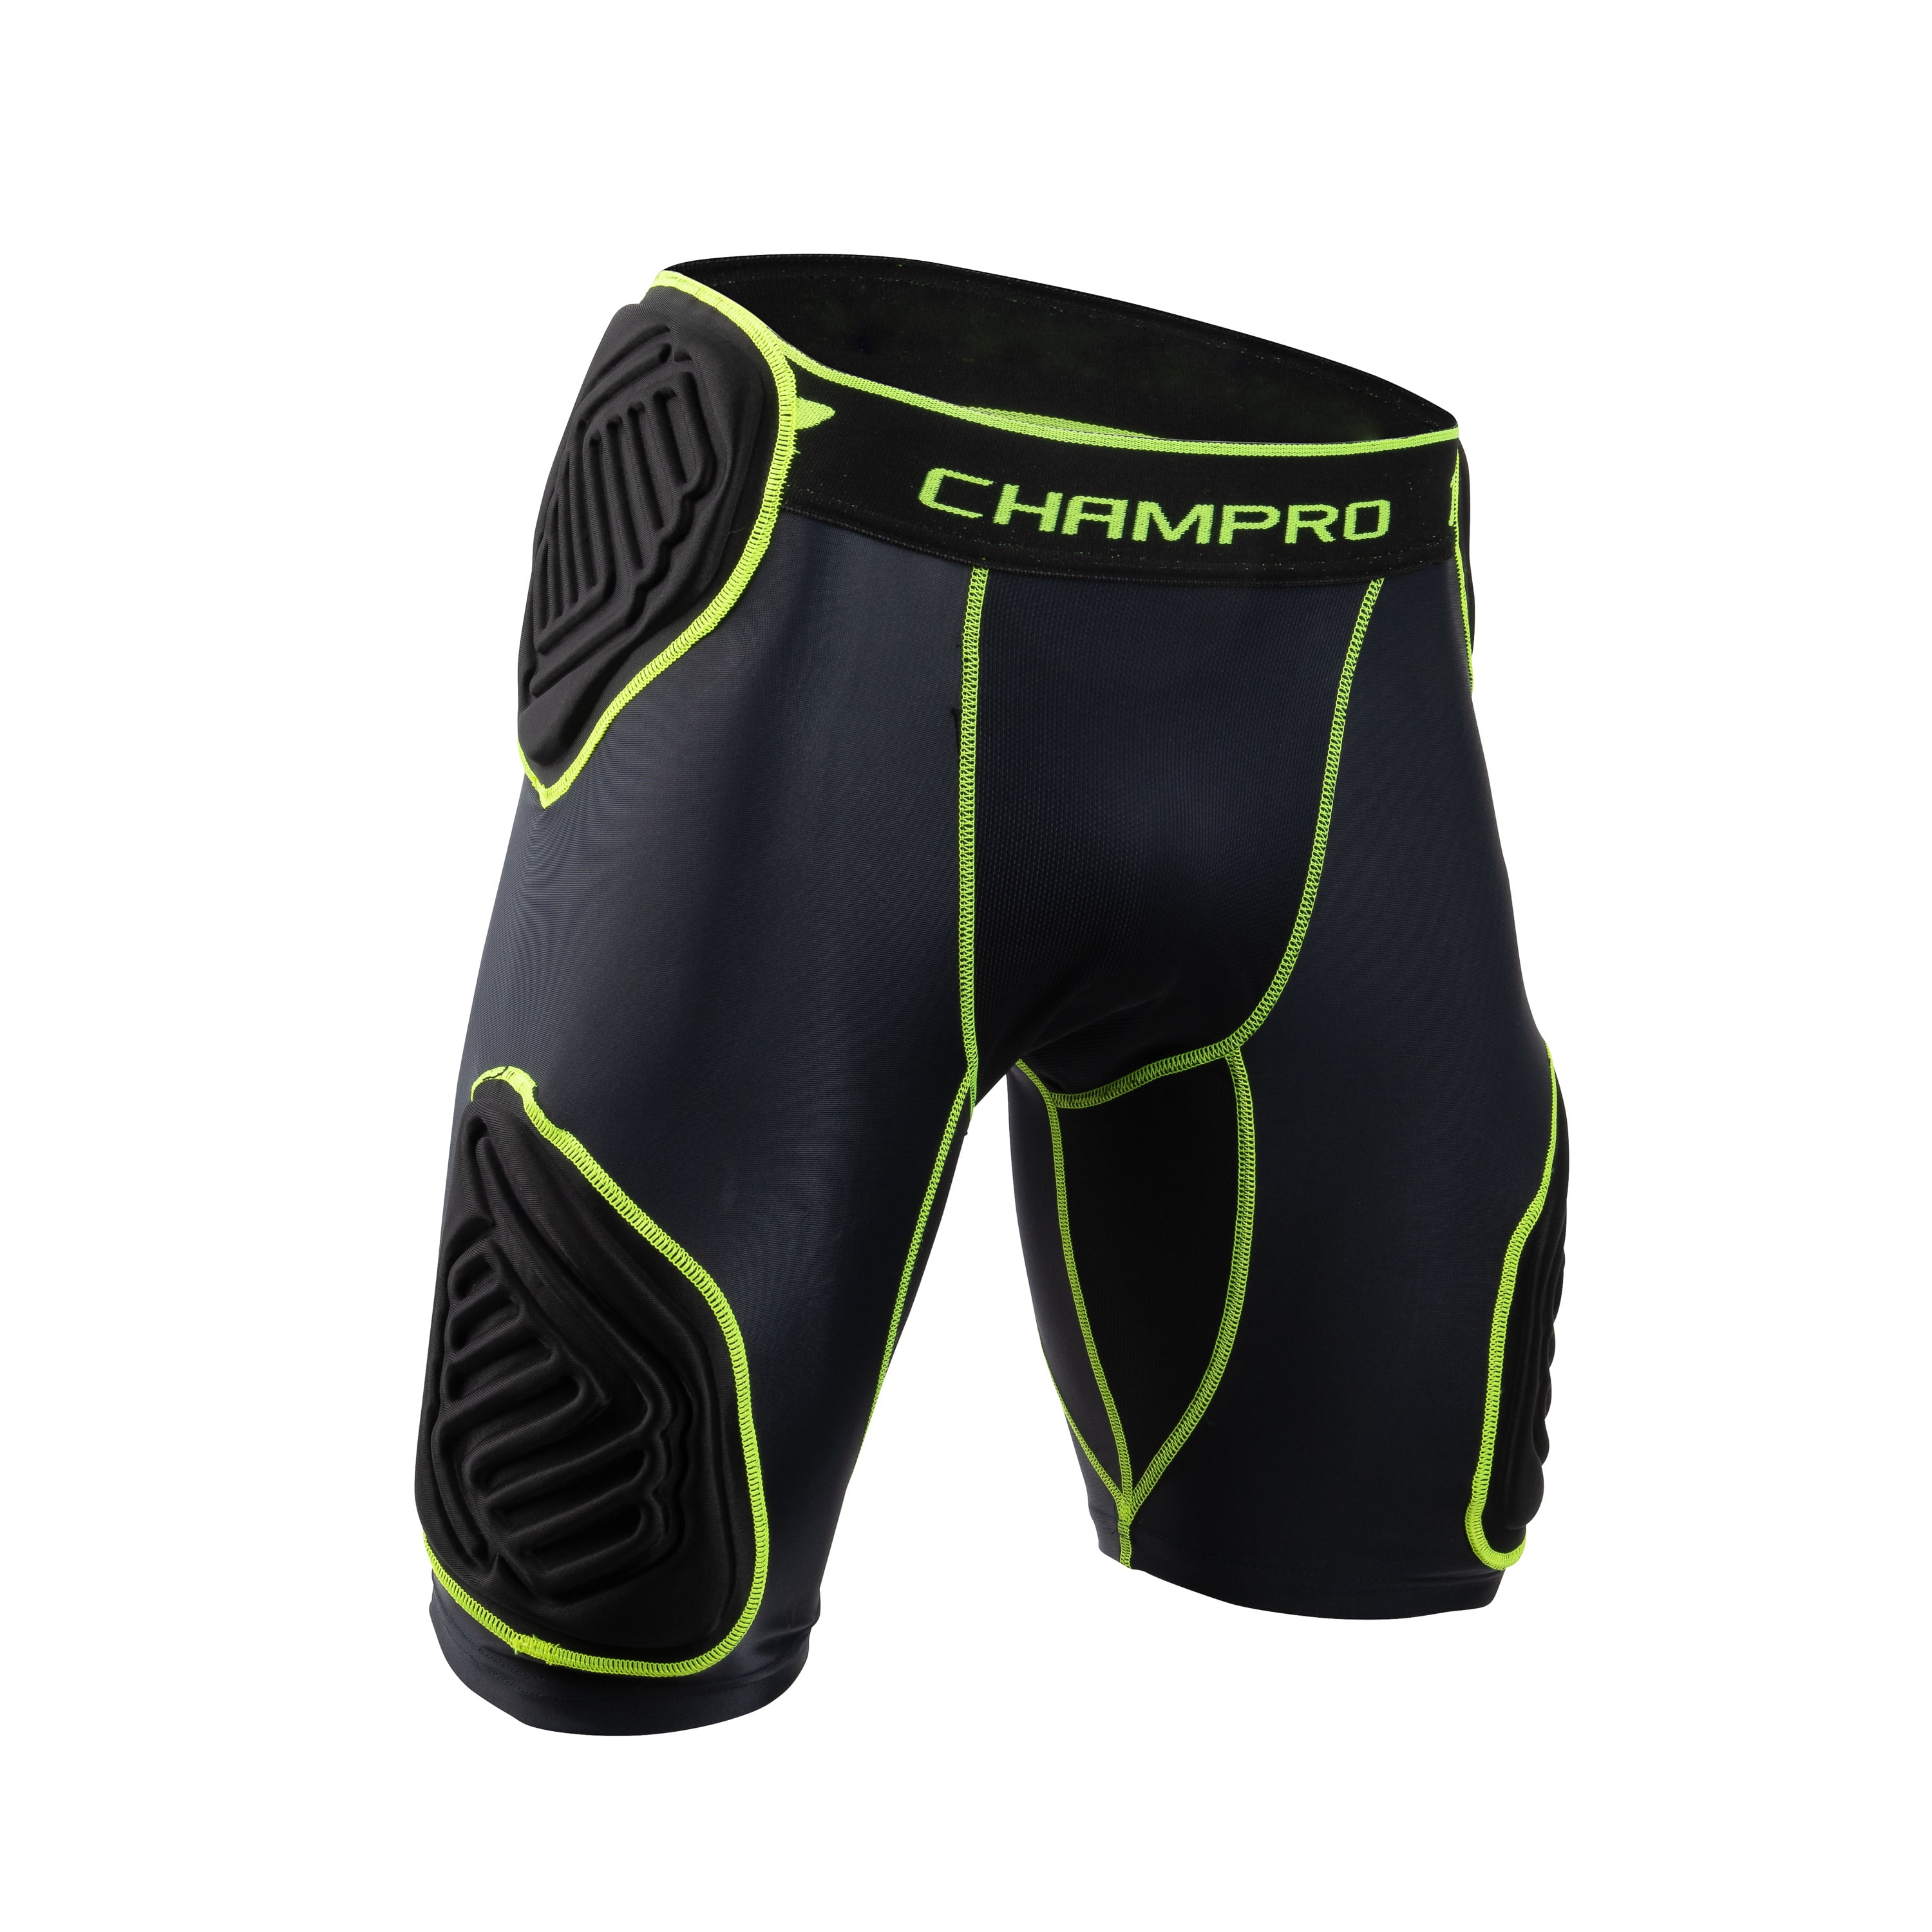 Champro Sports Man Up 7-Pad Football Girdle, Compression Fit, Youth & Adult  Sizes 